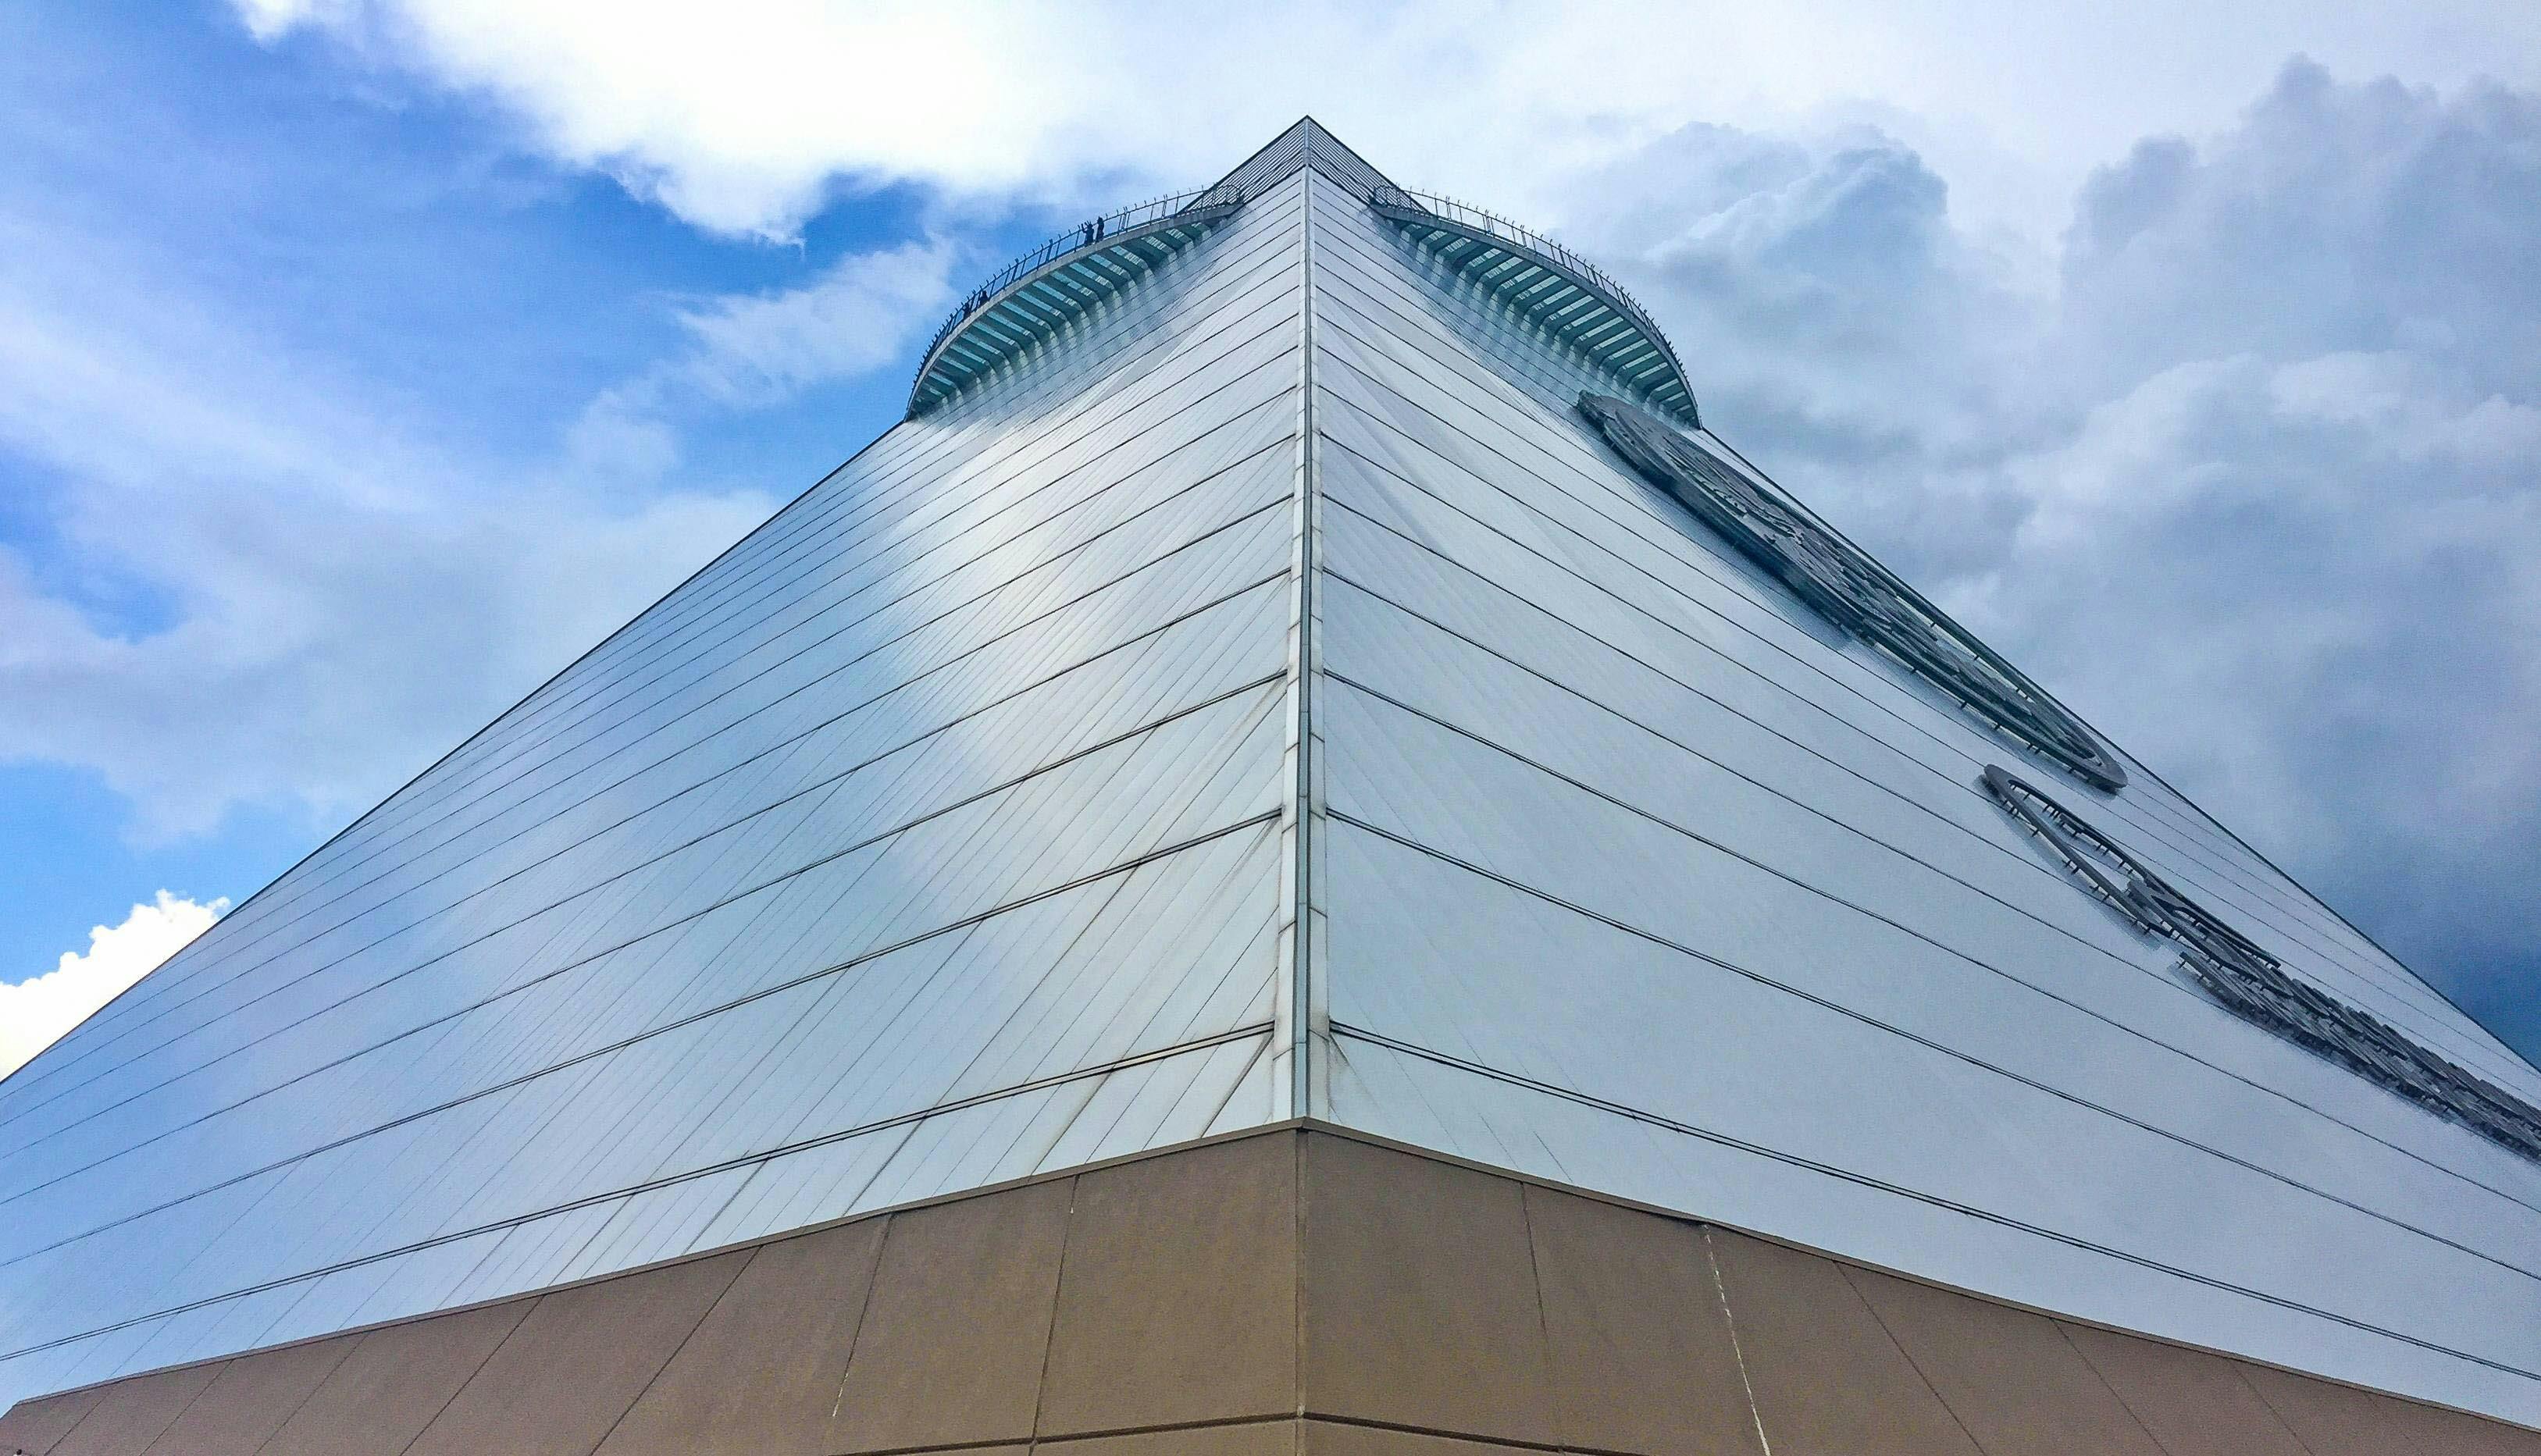 view--of-Memphis-Pyramid-observation-decks-from-below